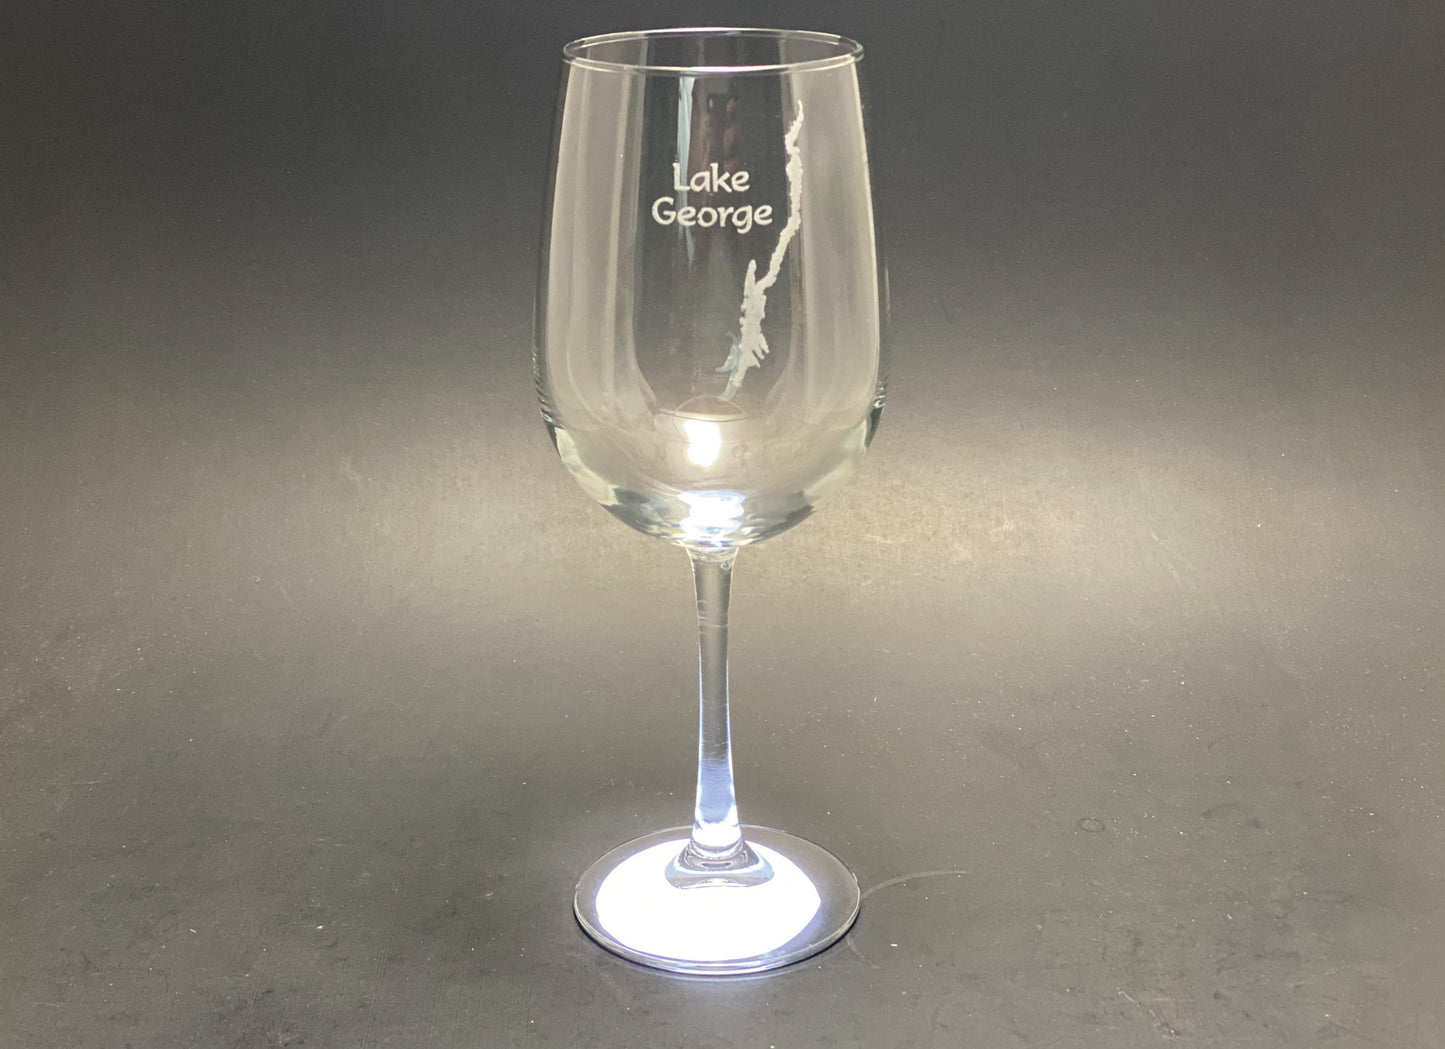 Lake George with Words - 18.5 oz Stemmed Wine Glass